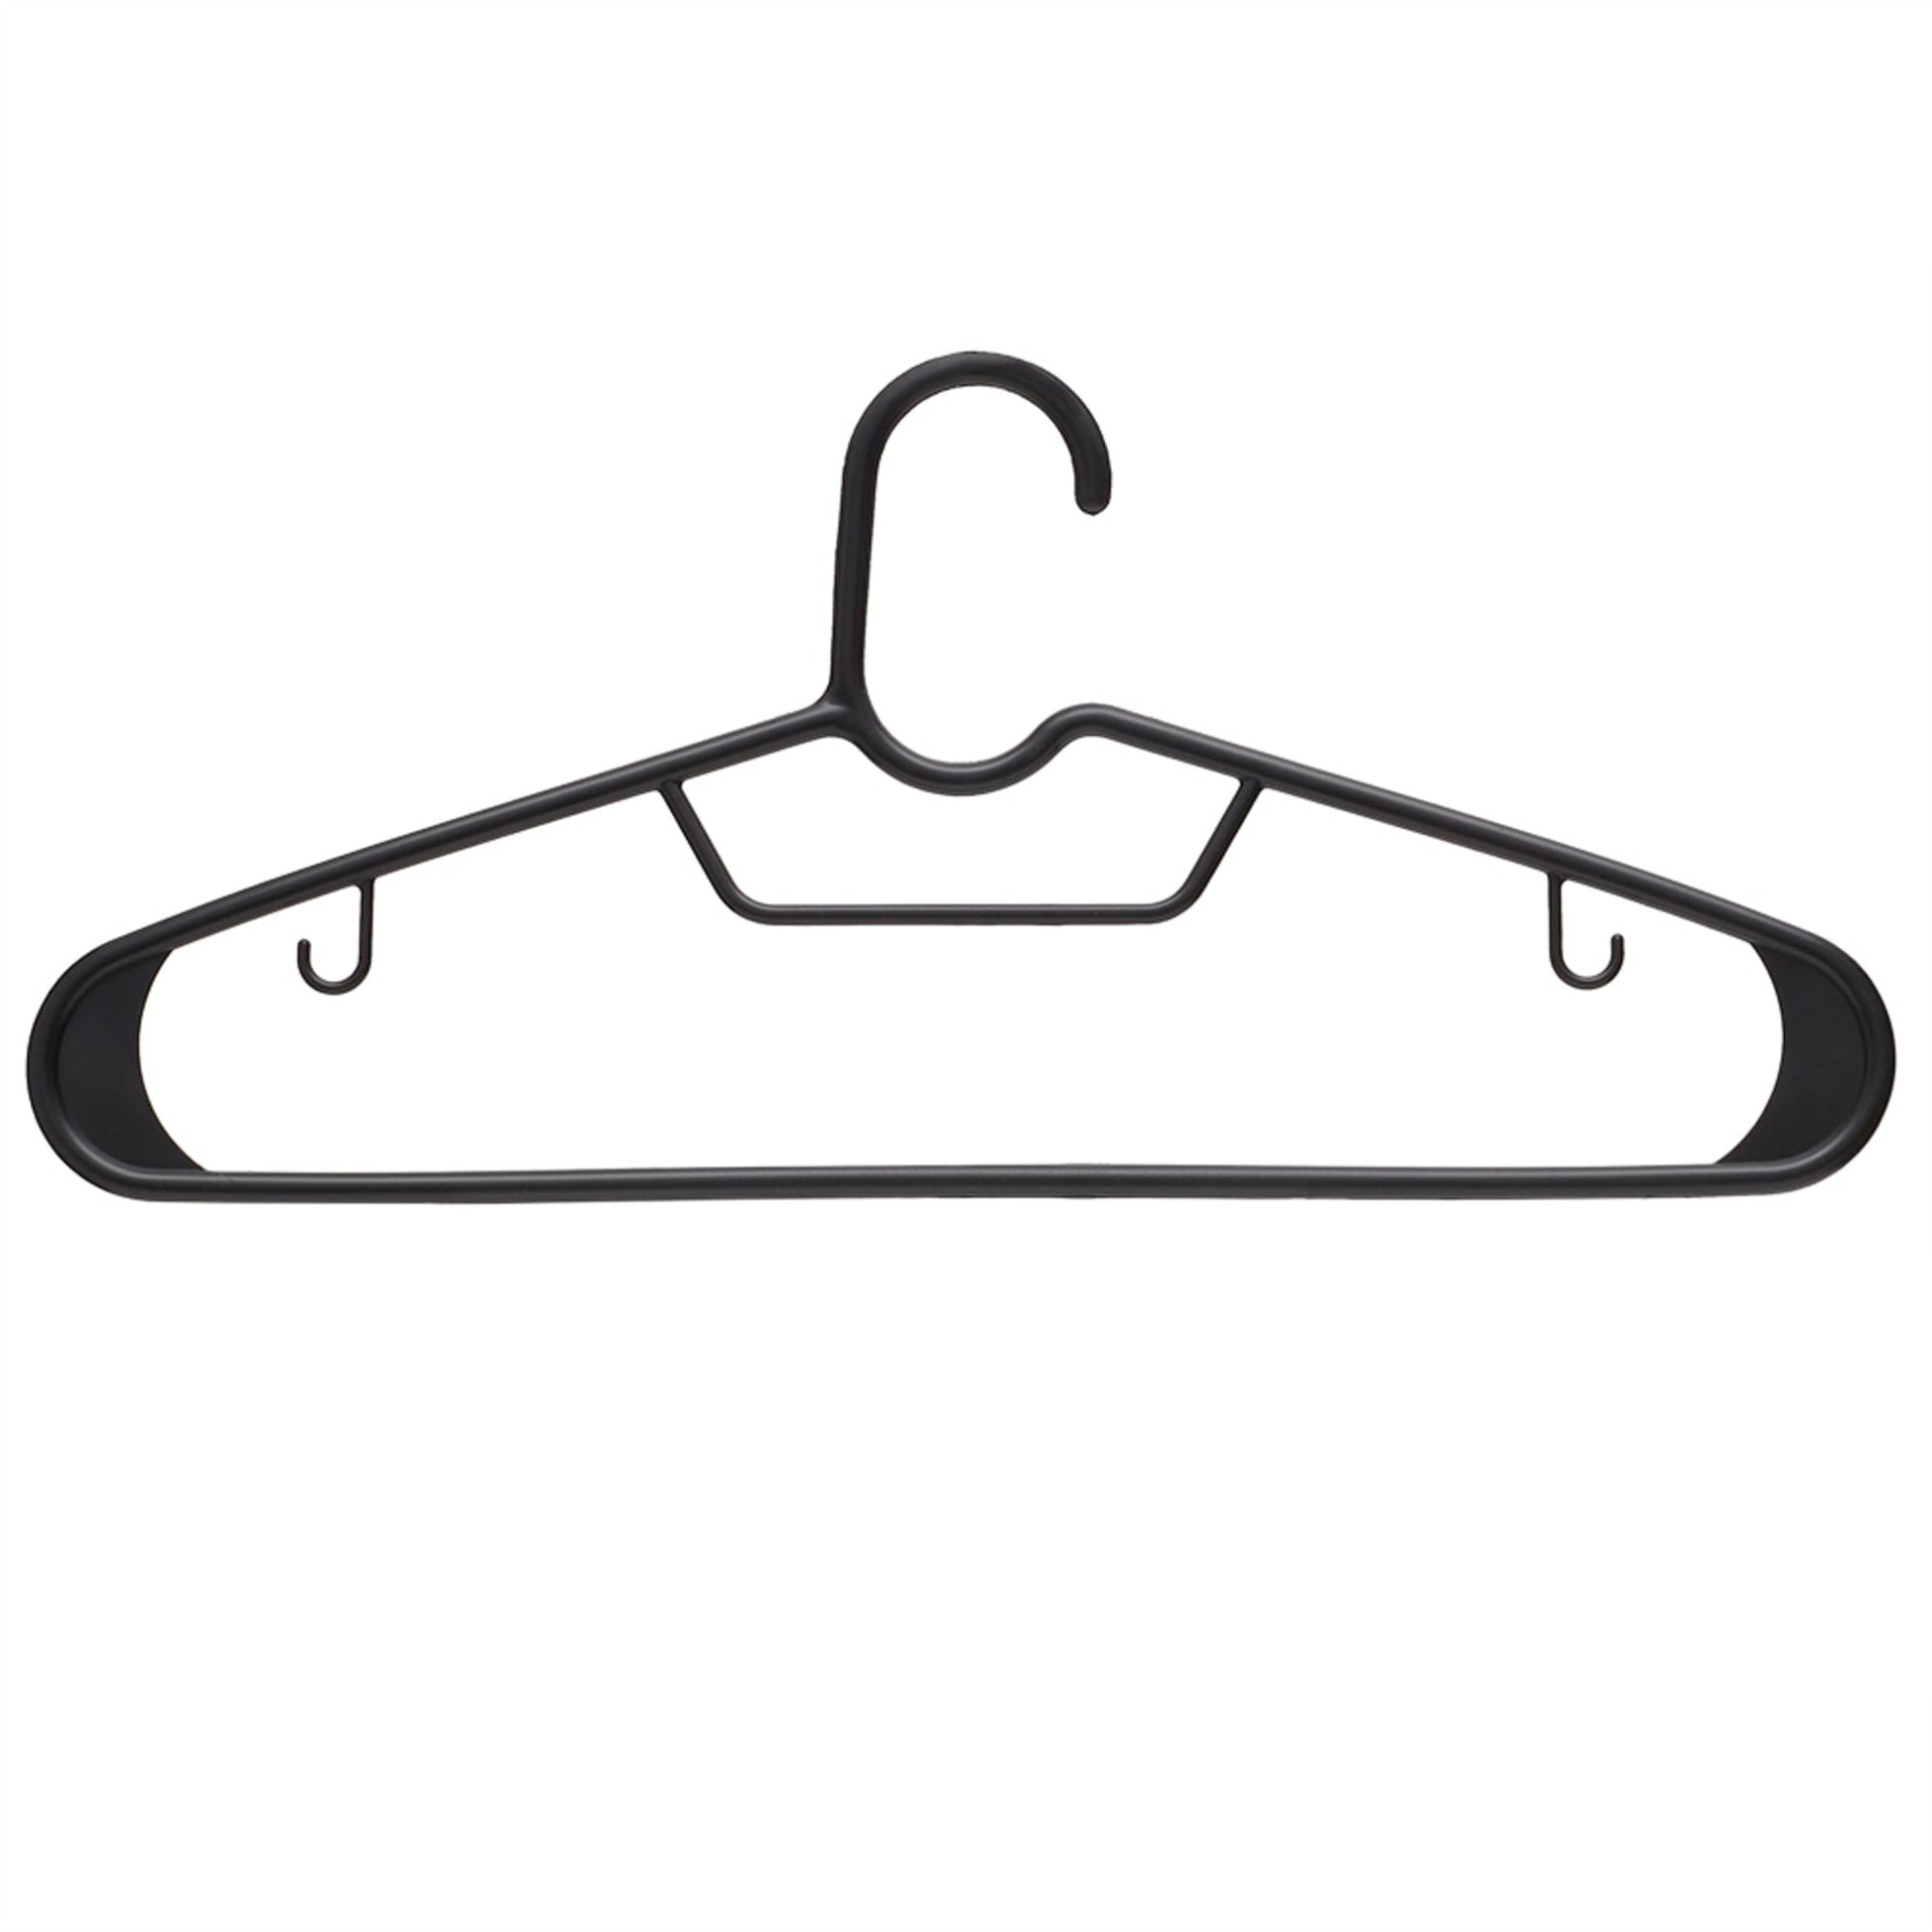 Black Plastic Top Hanger  Product & Reviews - Only Hangers – Only